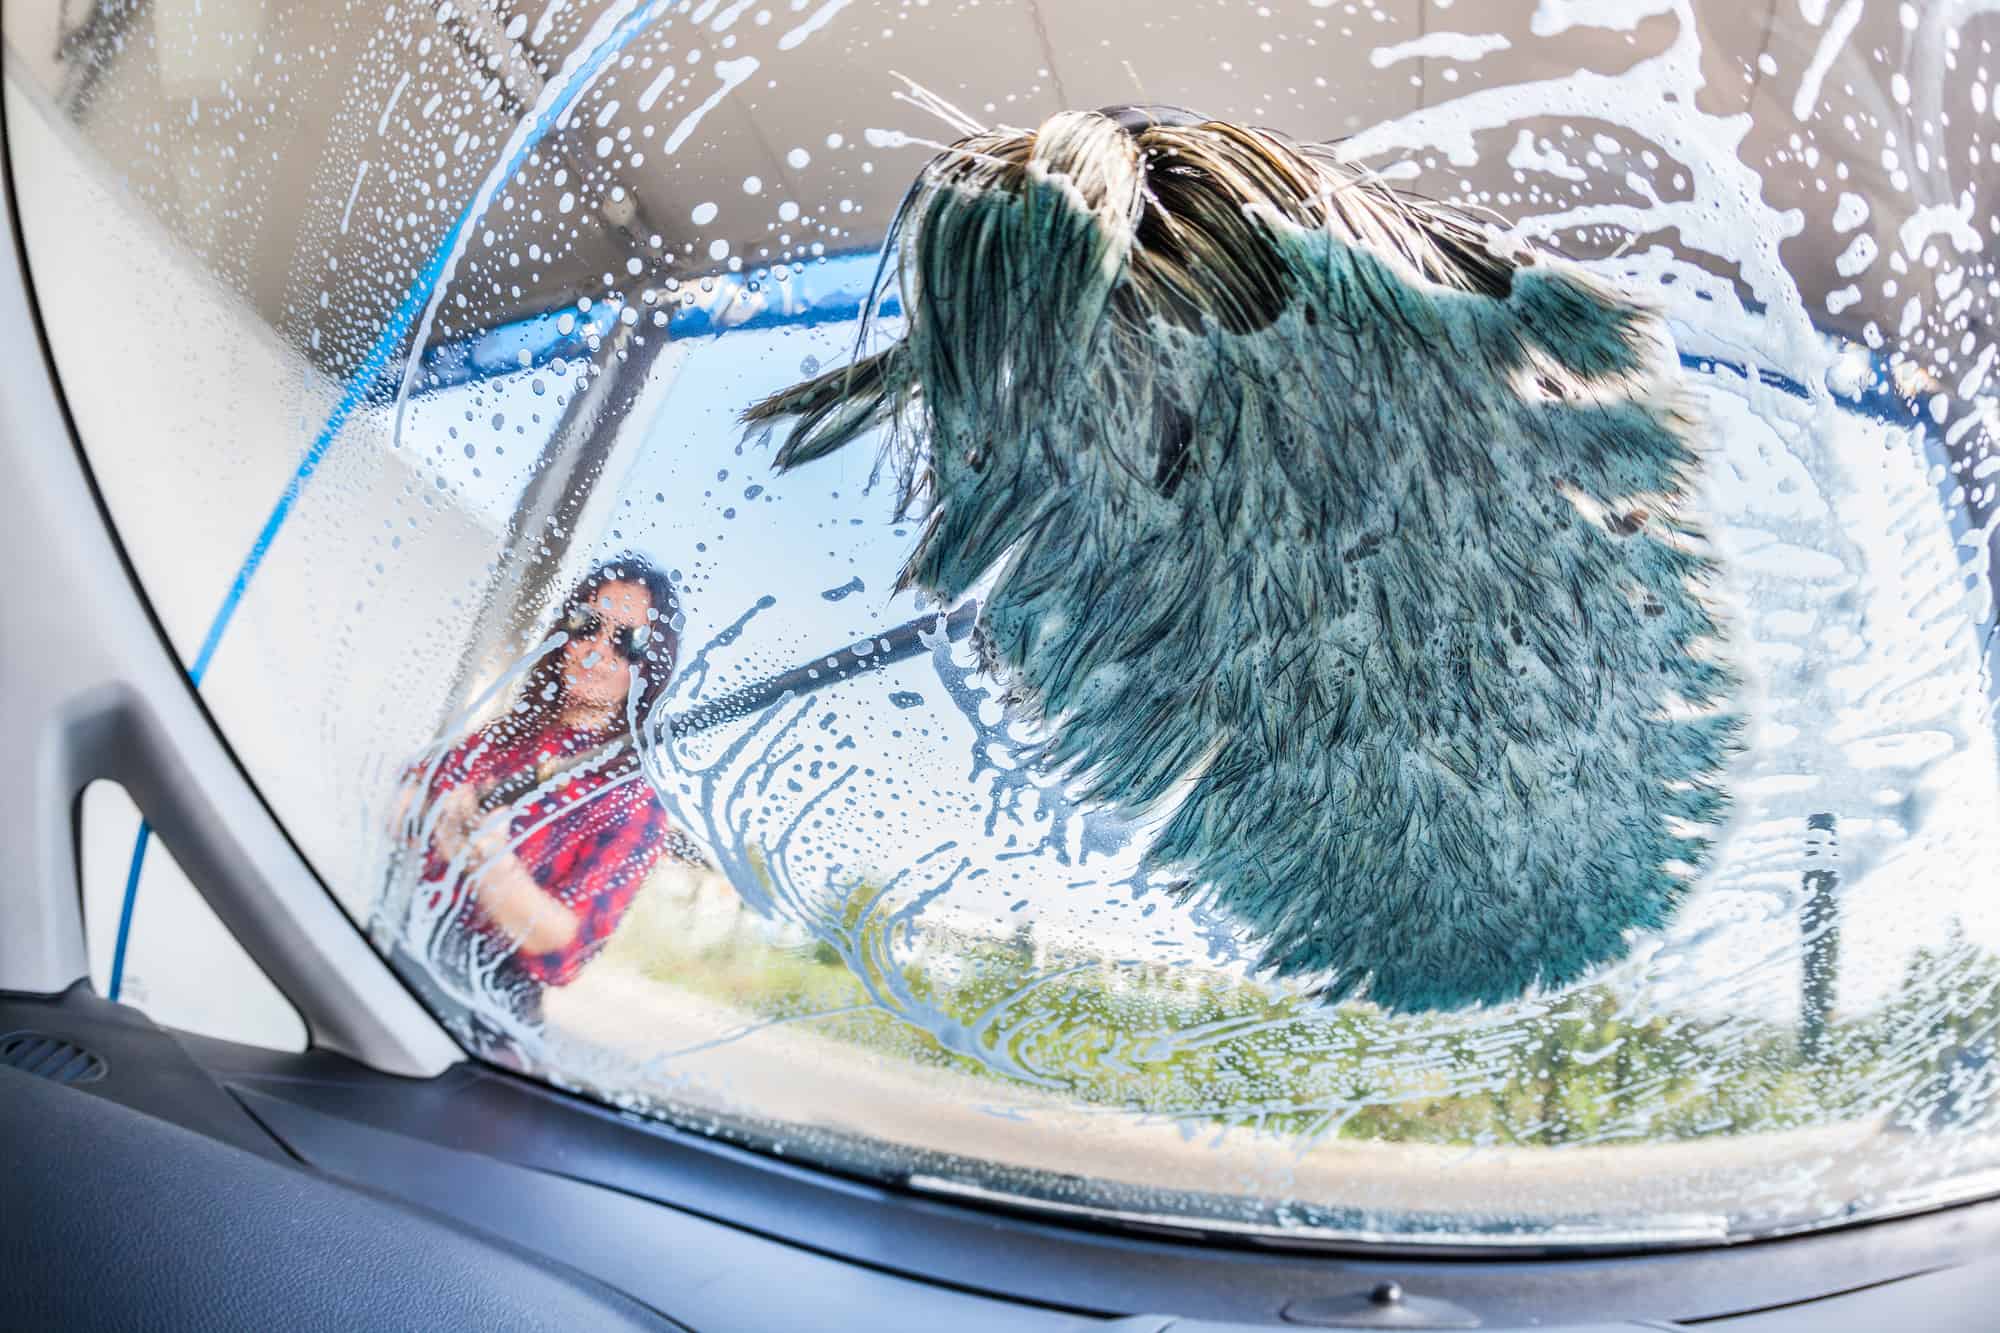 How to clean inside of windshield